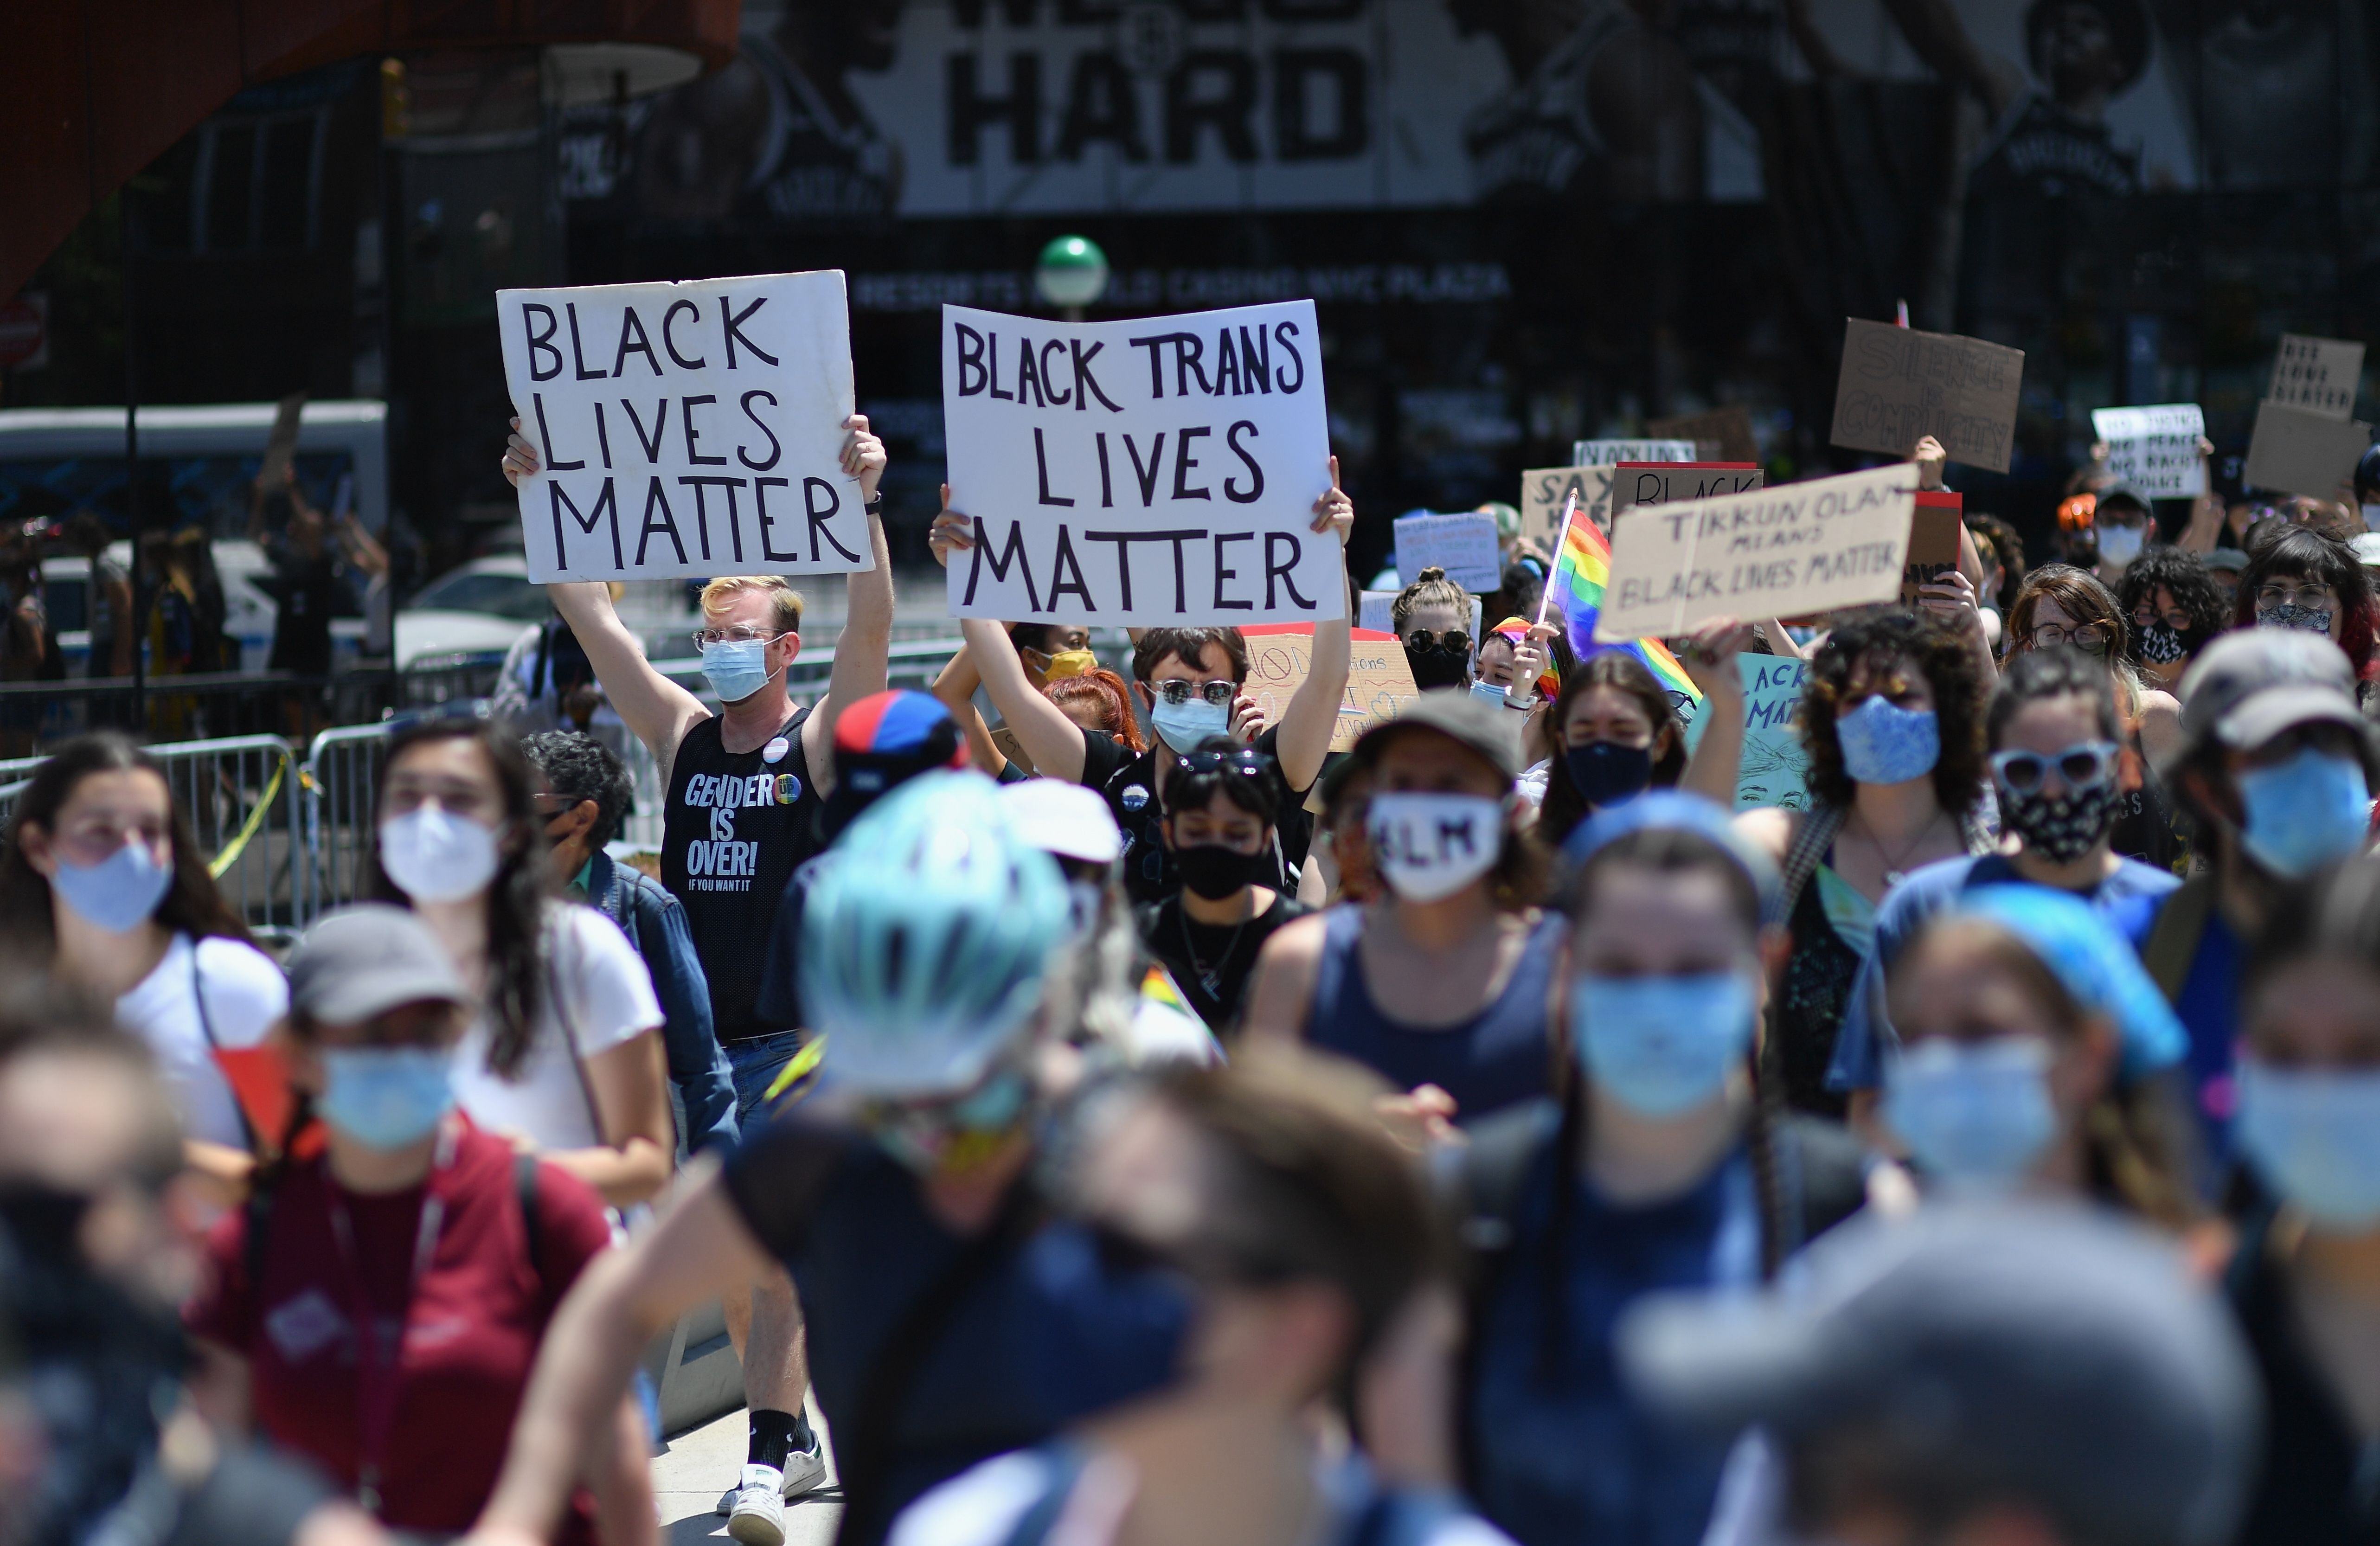 Protesters march during a ‘Black Trans Lives Matter’ march against police brutality on 17 June, 2020, in the Brooklyn Borough of New York City.